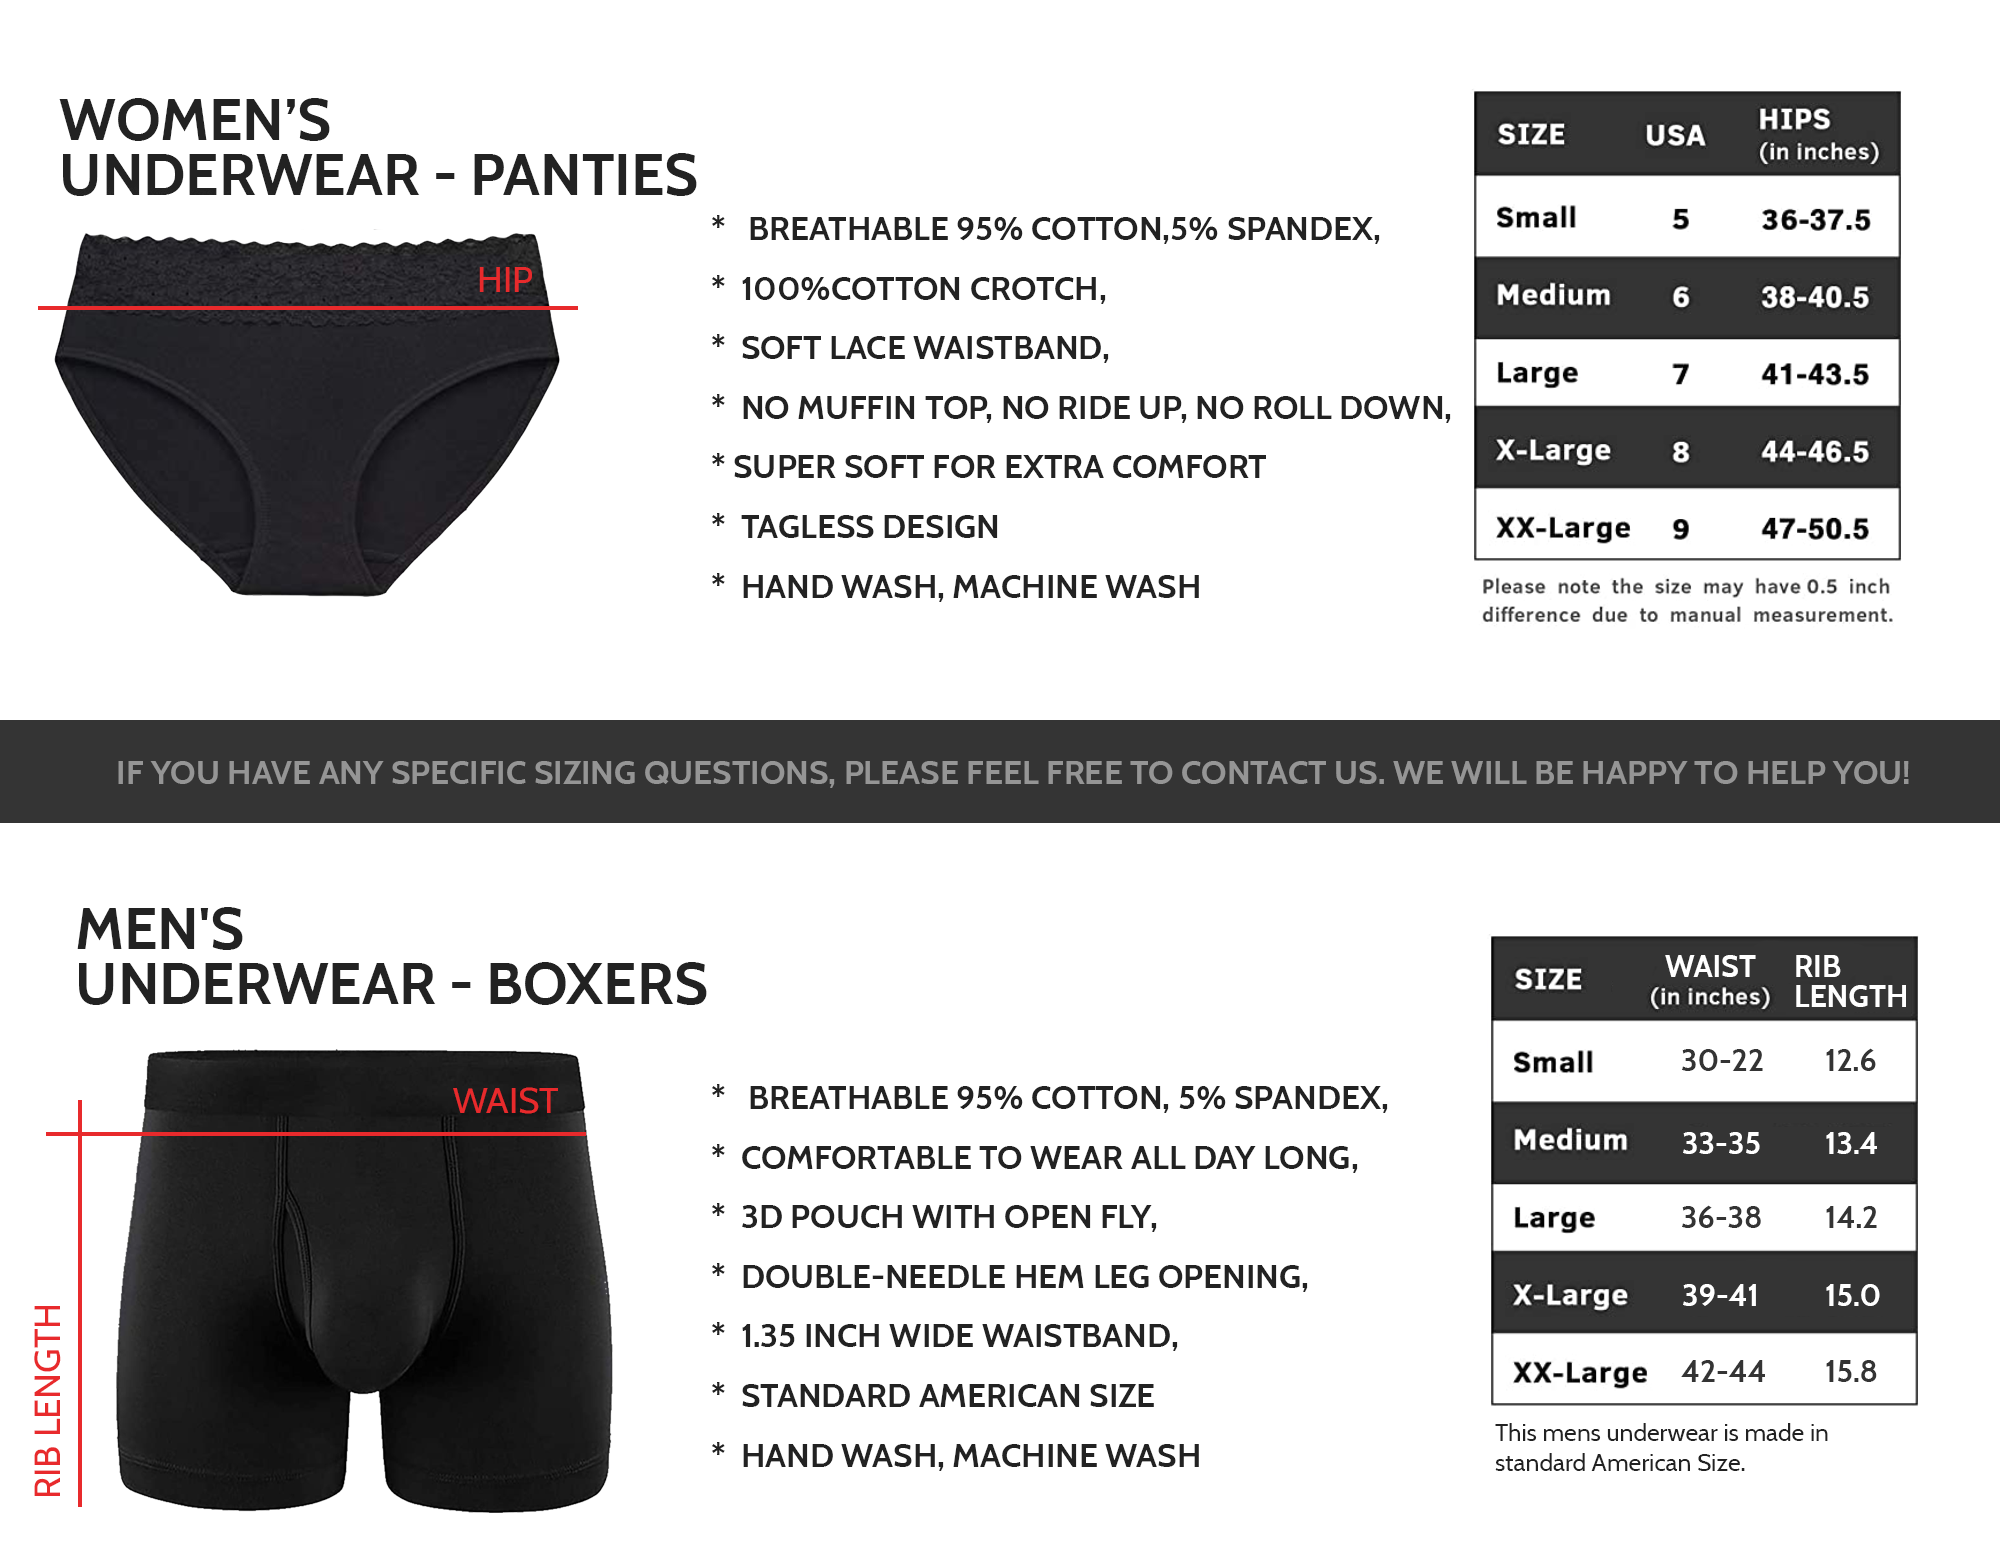 Matching Underwear for Couples Husband and Wife Gifts Funny Valentines Day,  His and Hers Undies Set